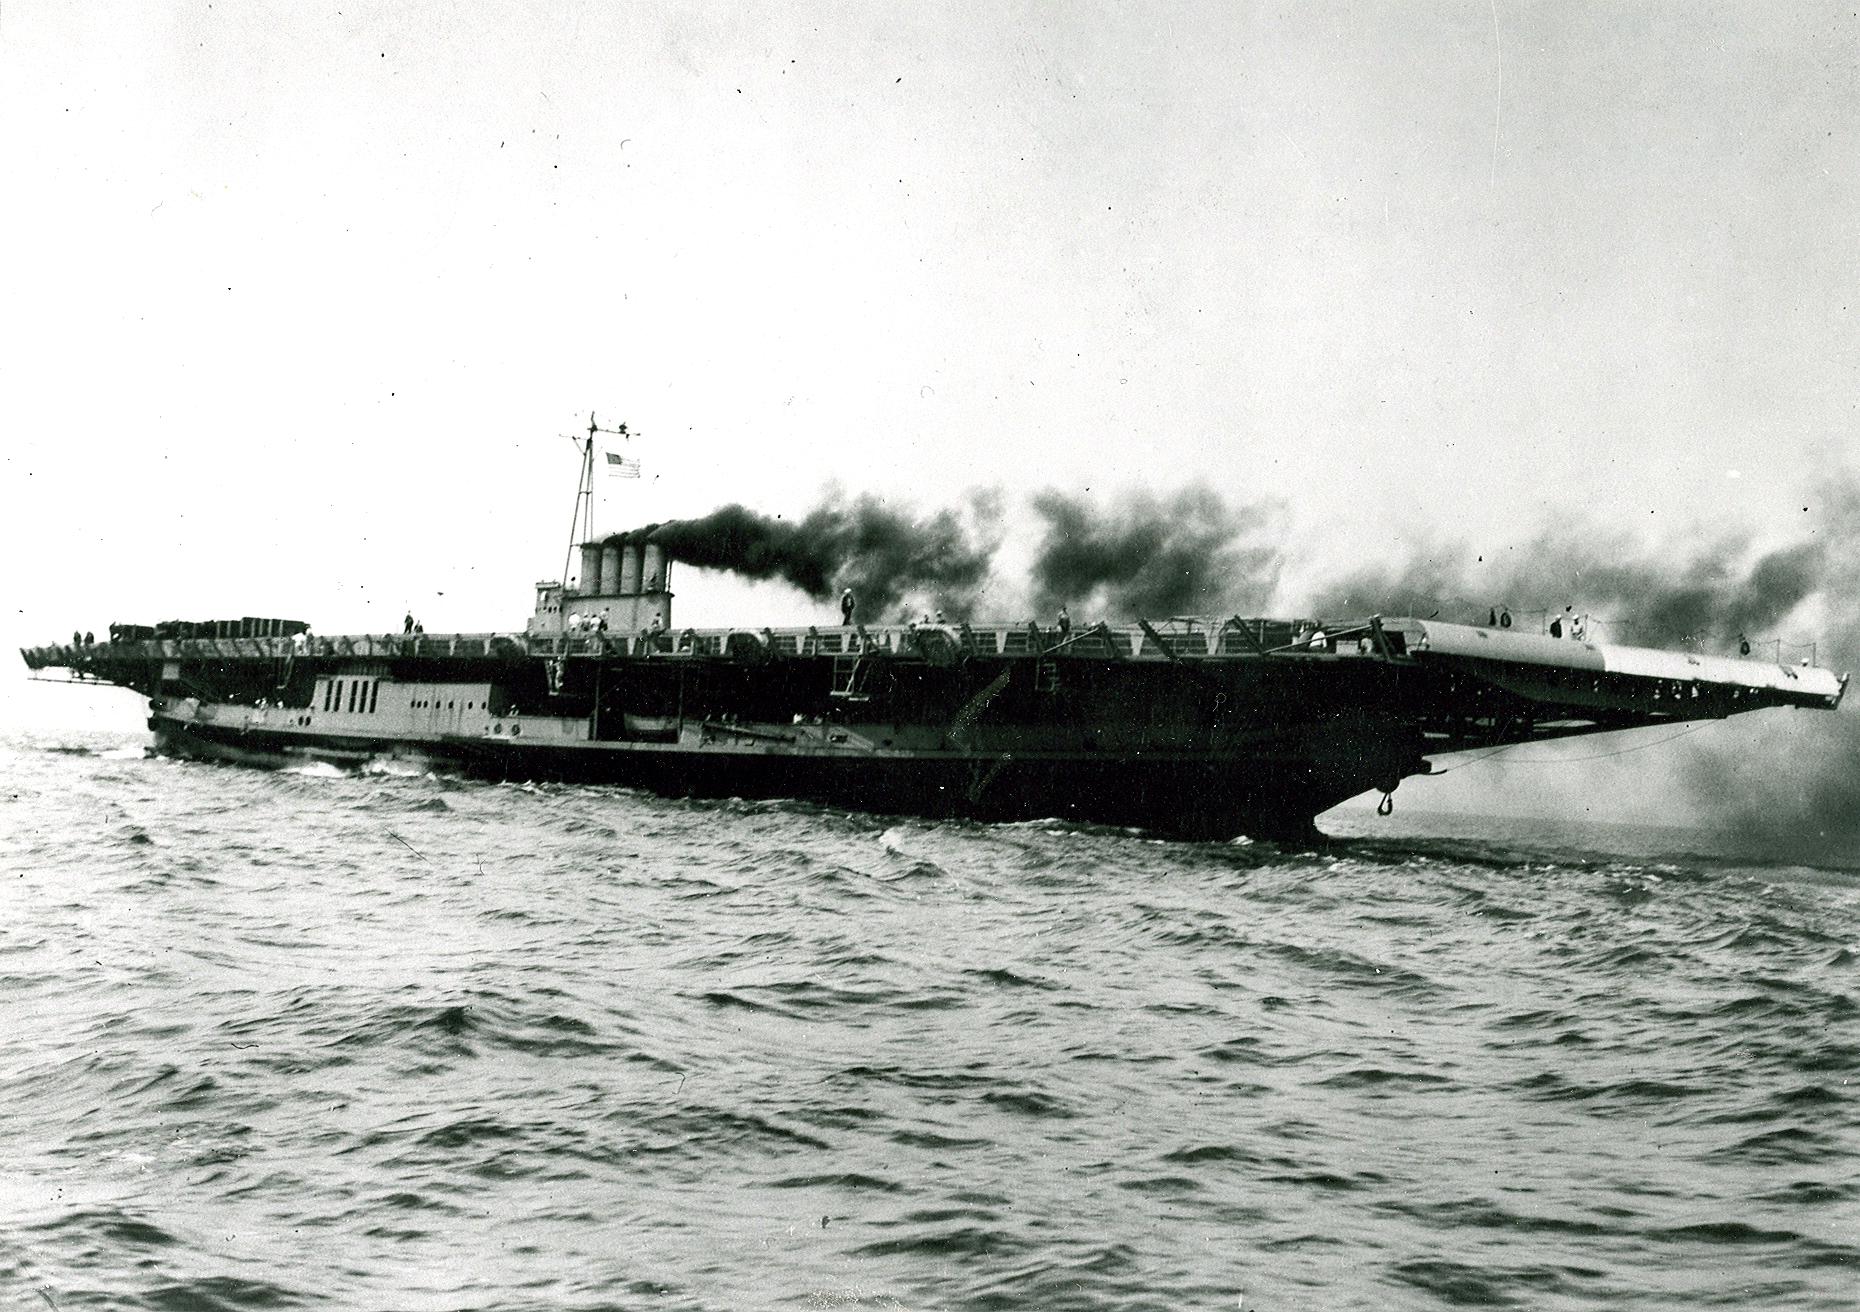 USS Wolverine during trials on Lake Erie, 9 Aug 1942.